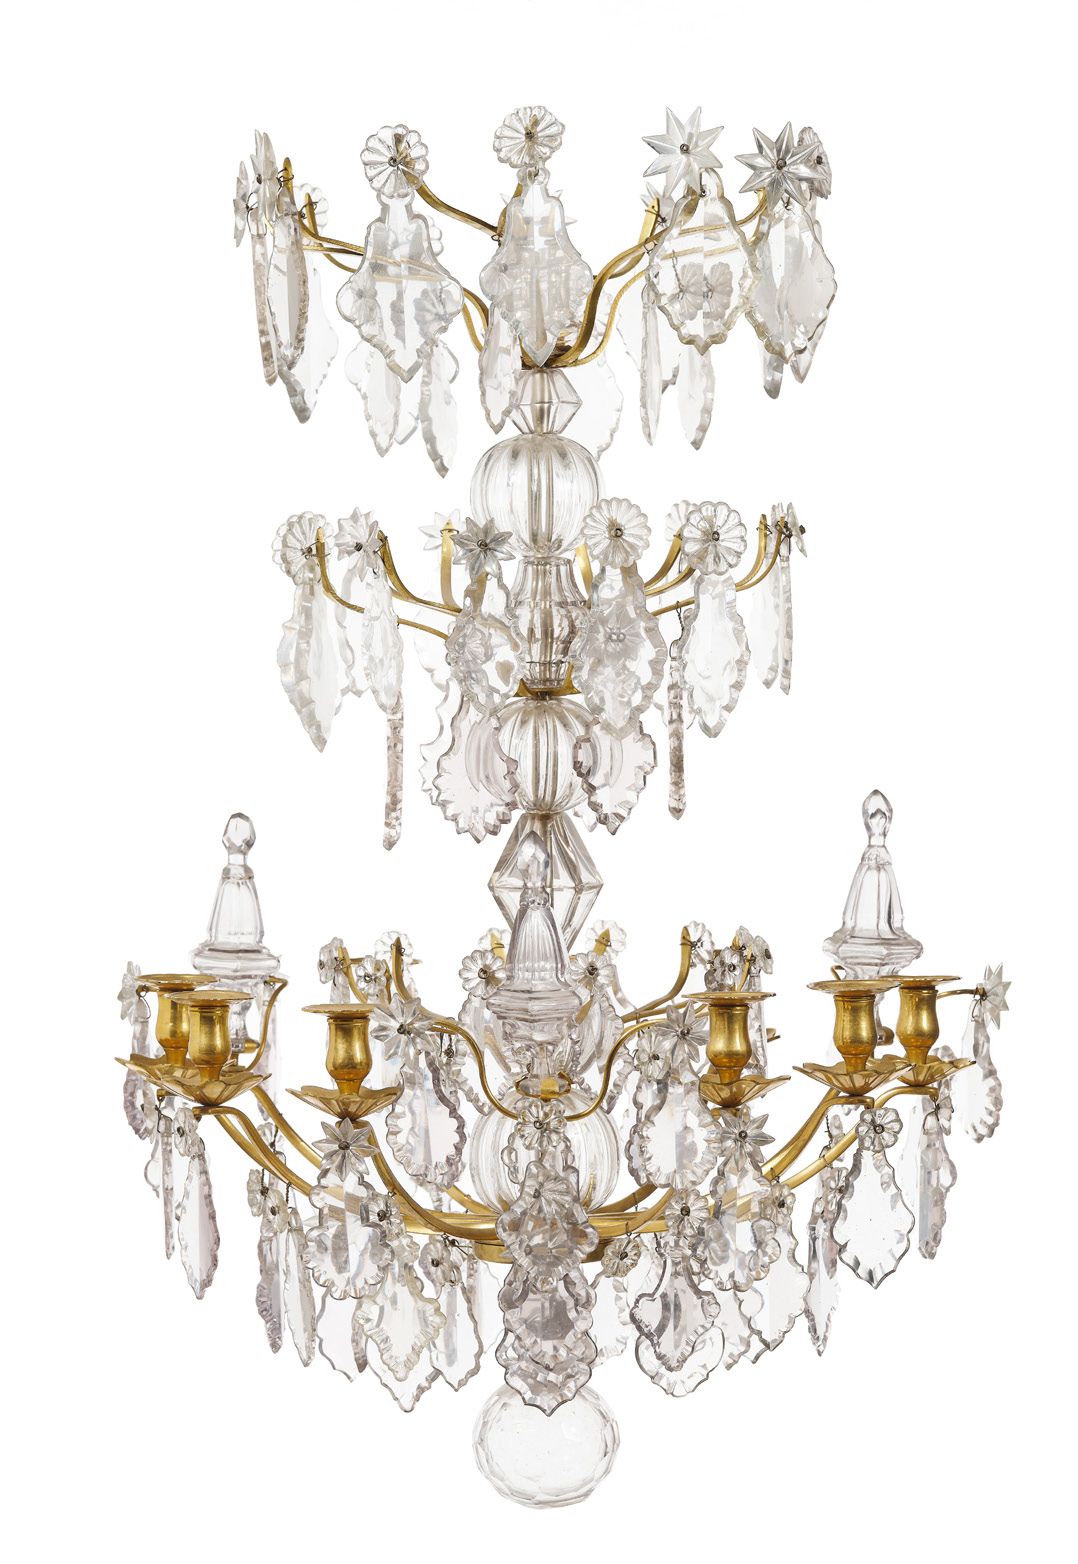 Null SUPERB LUSTRE with nine arms of lights in gilded bronze, decorated with dag&hellip;